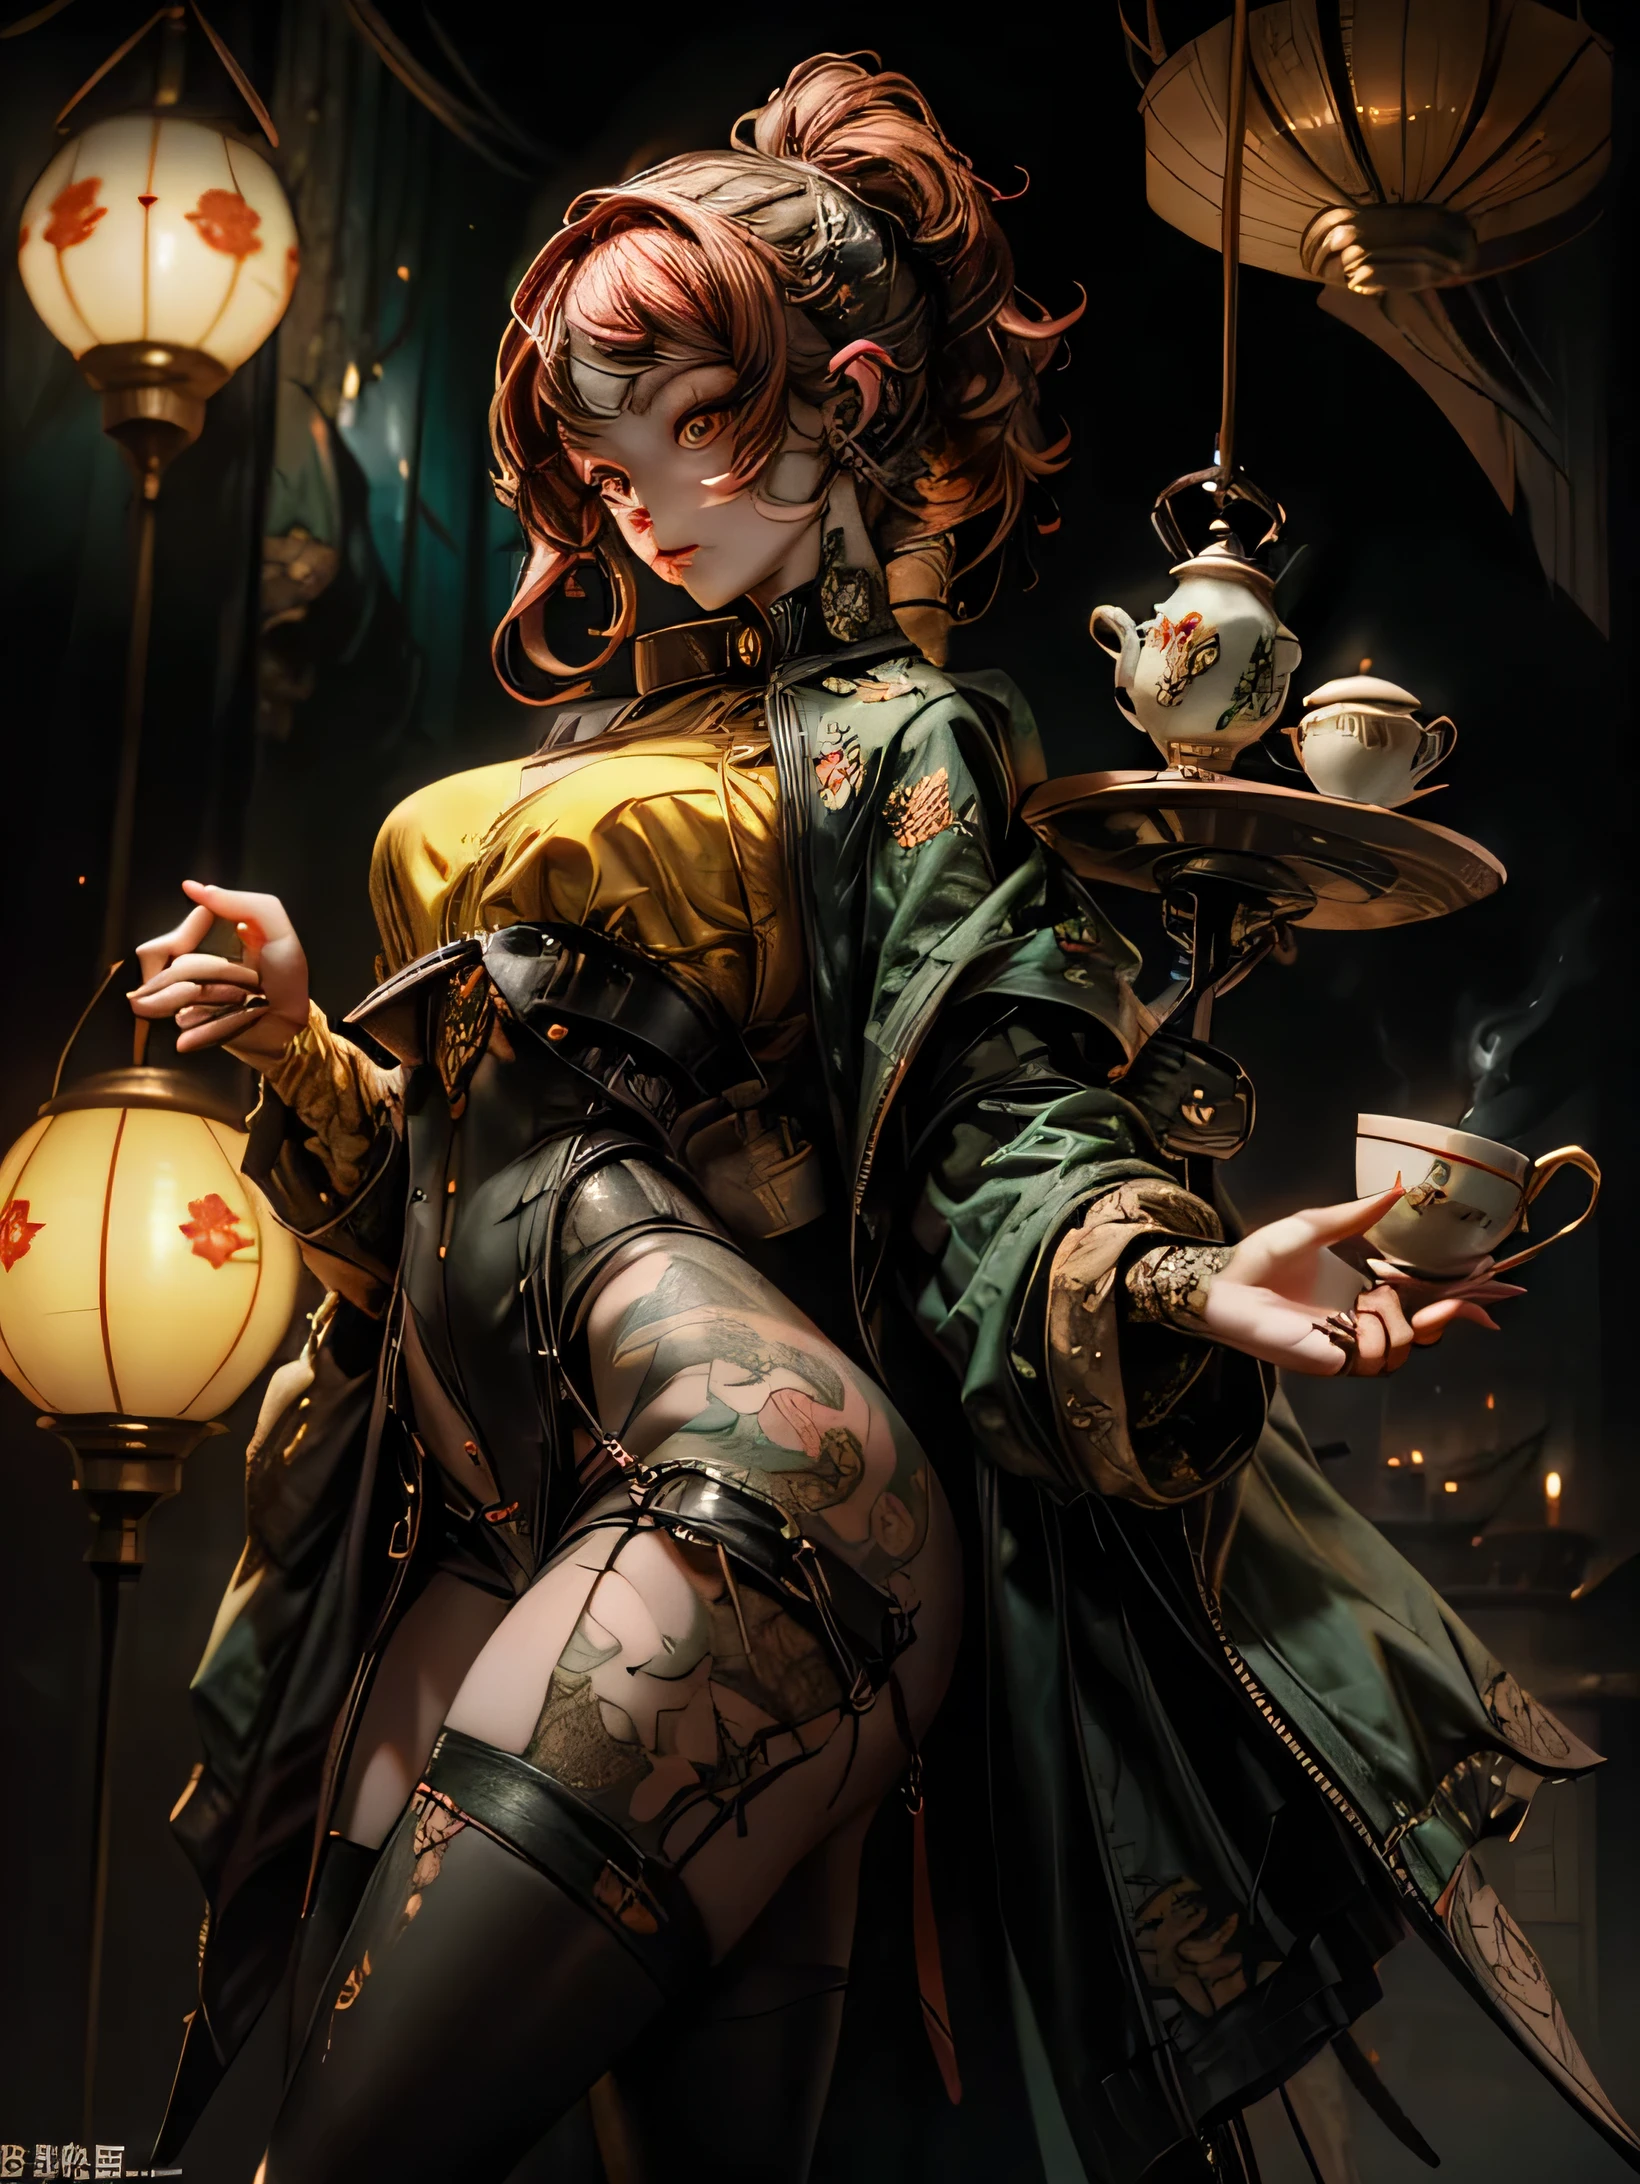 A beautiful young woman with green eyes with the appearance of Alice from Wonderland,  with red hair dressed as a dominatrix and sporting tattoos of ramen soups on her back and legs in a kind of Japanese-style tea ceremony with a teapot and cups with cat eyes and ears in a dark place with little lighting by black candles.
